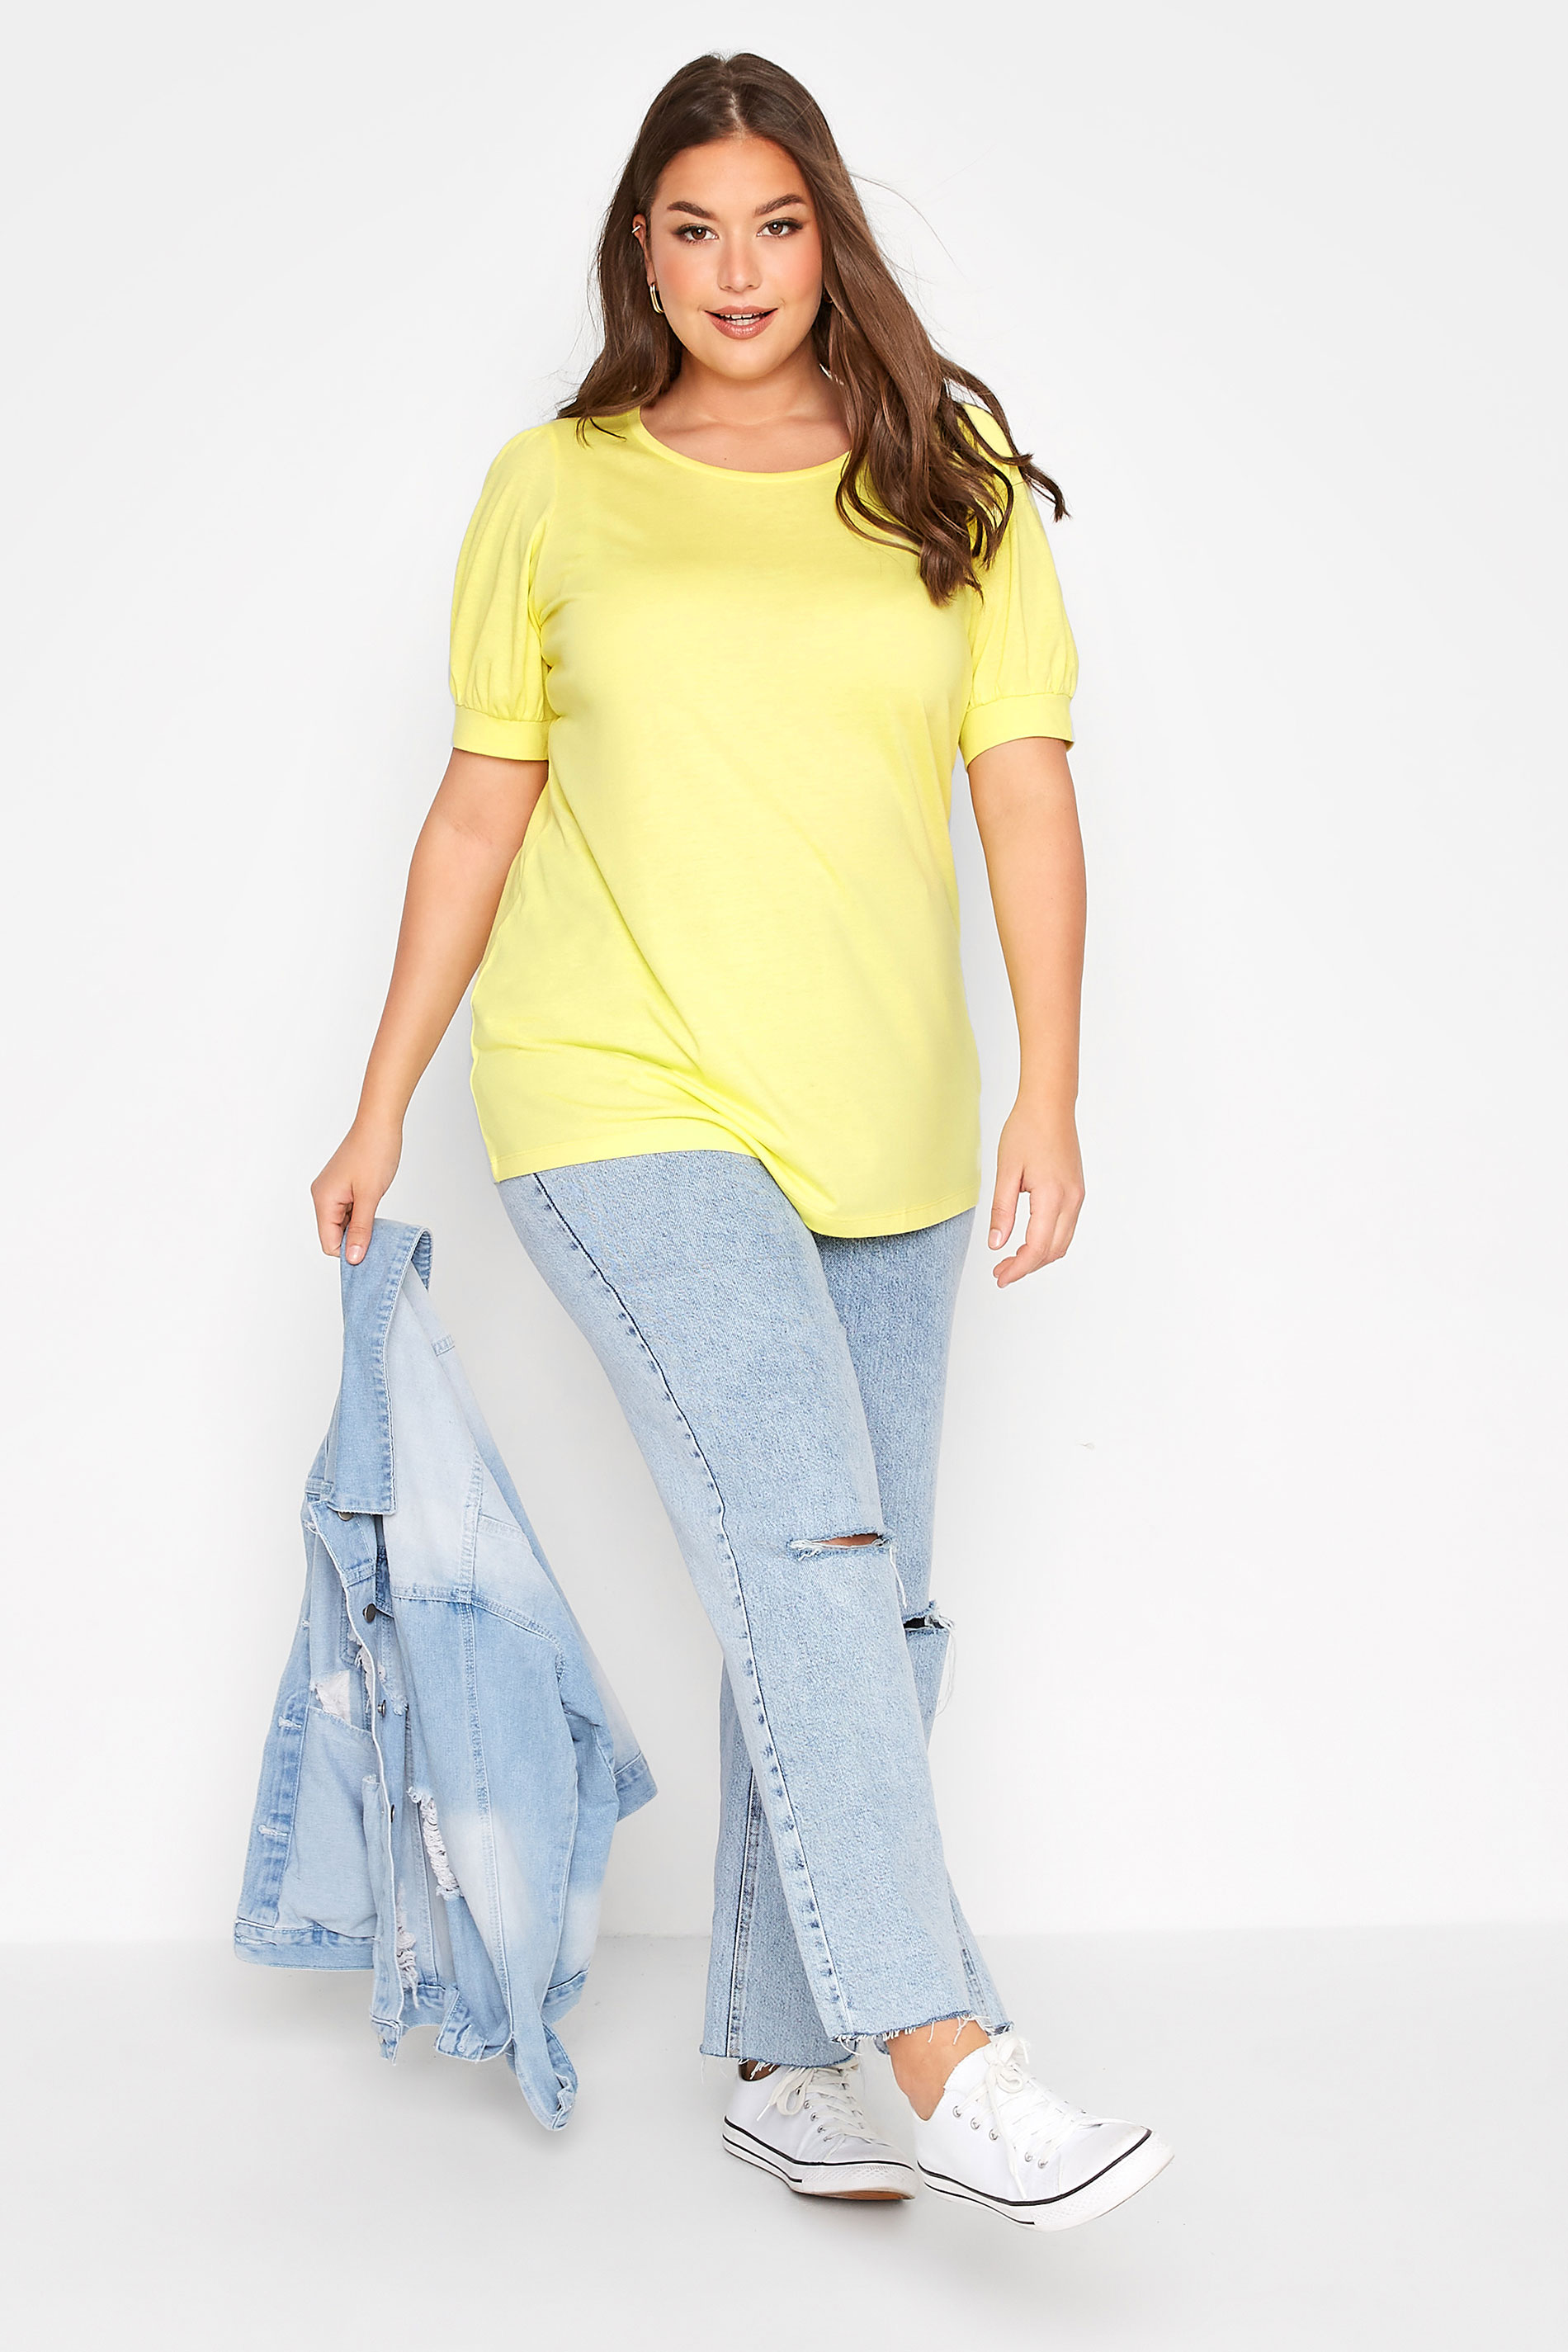 Grande taille  Tops Grande taille  T-Shirts | T-Shirt Jaune Manches Courtes Bouffantes - WM86629